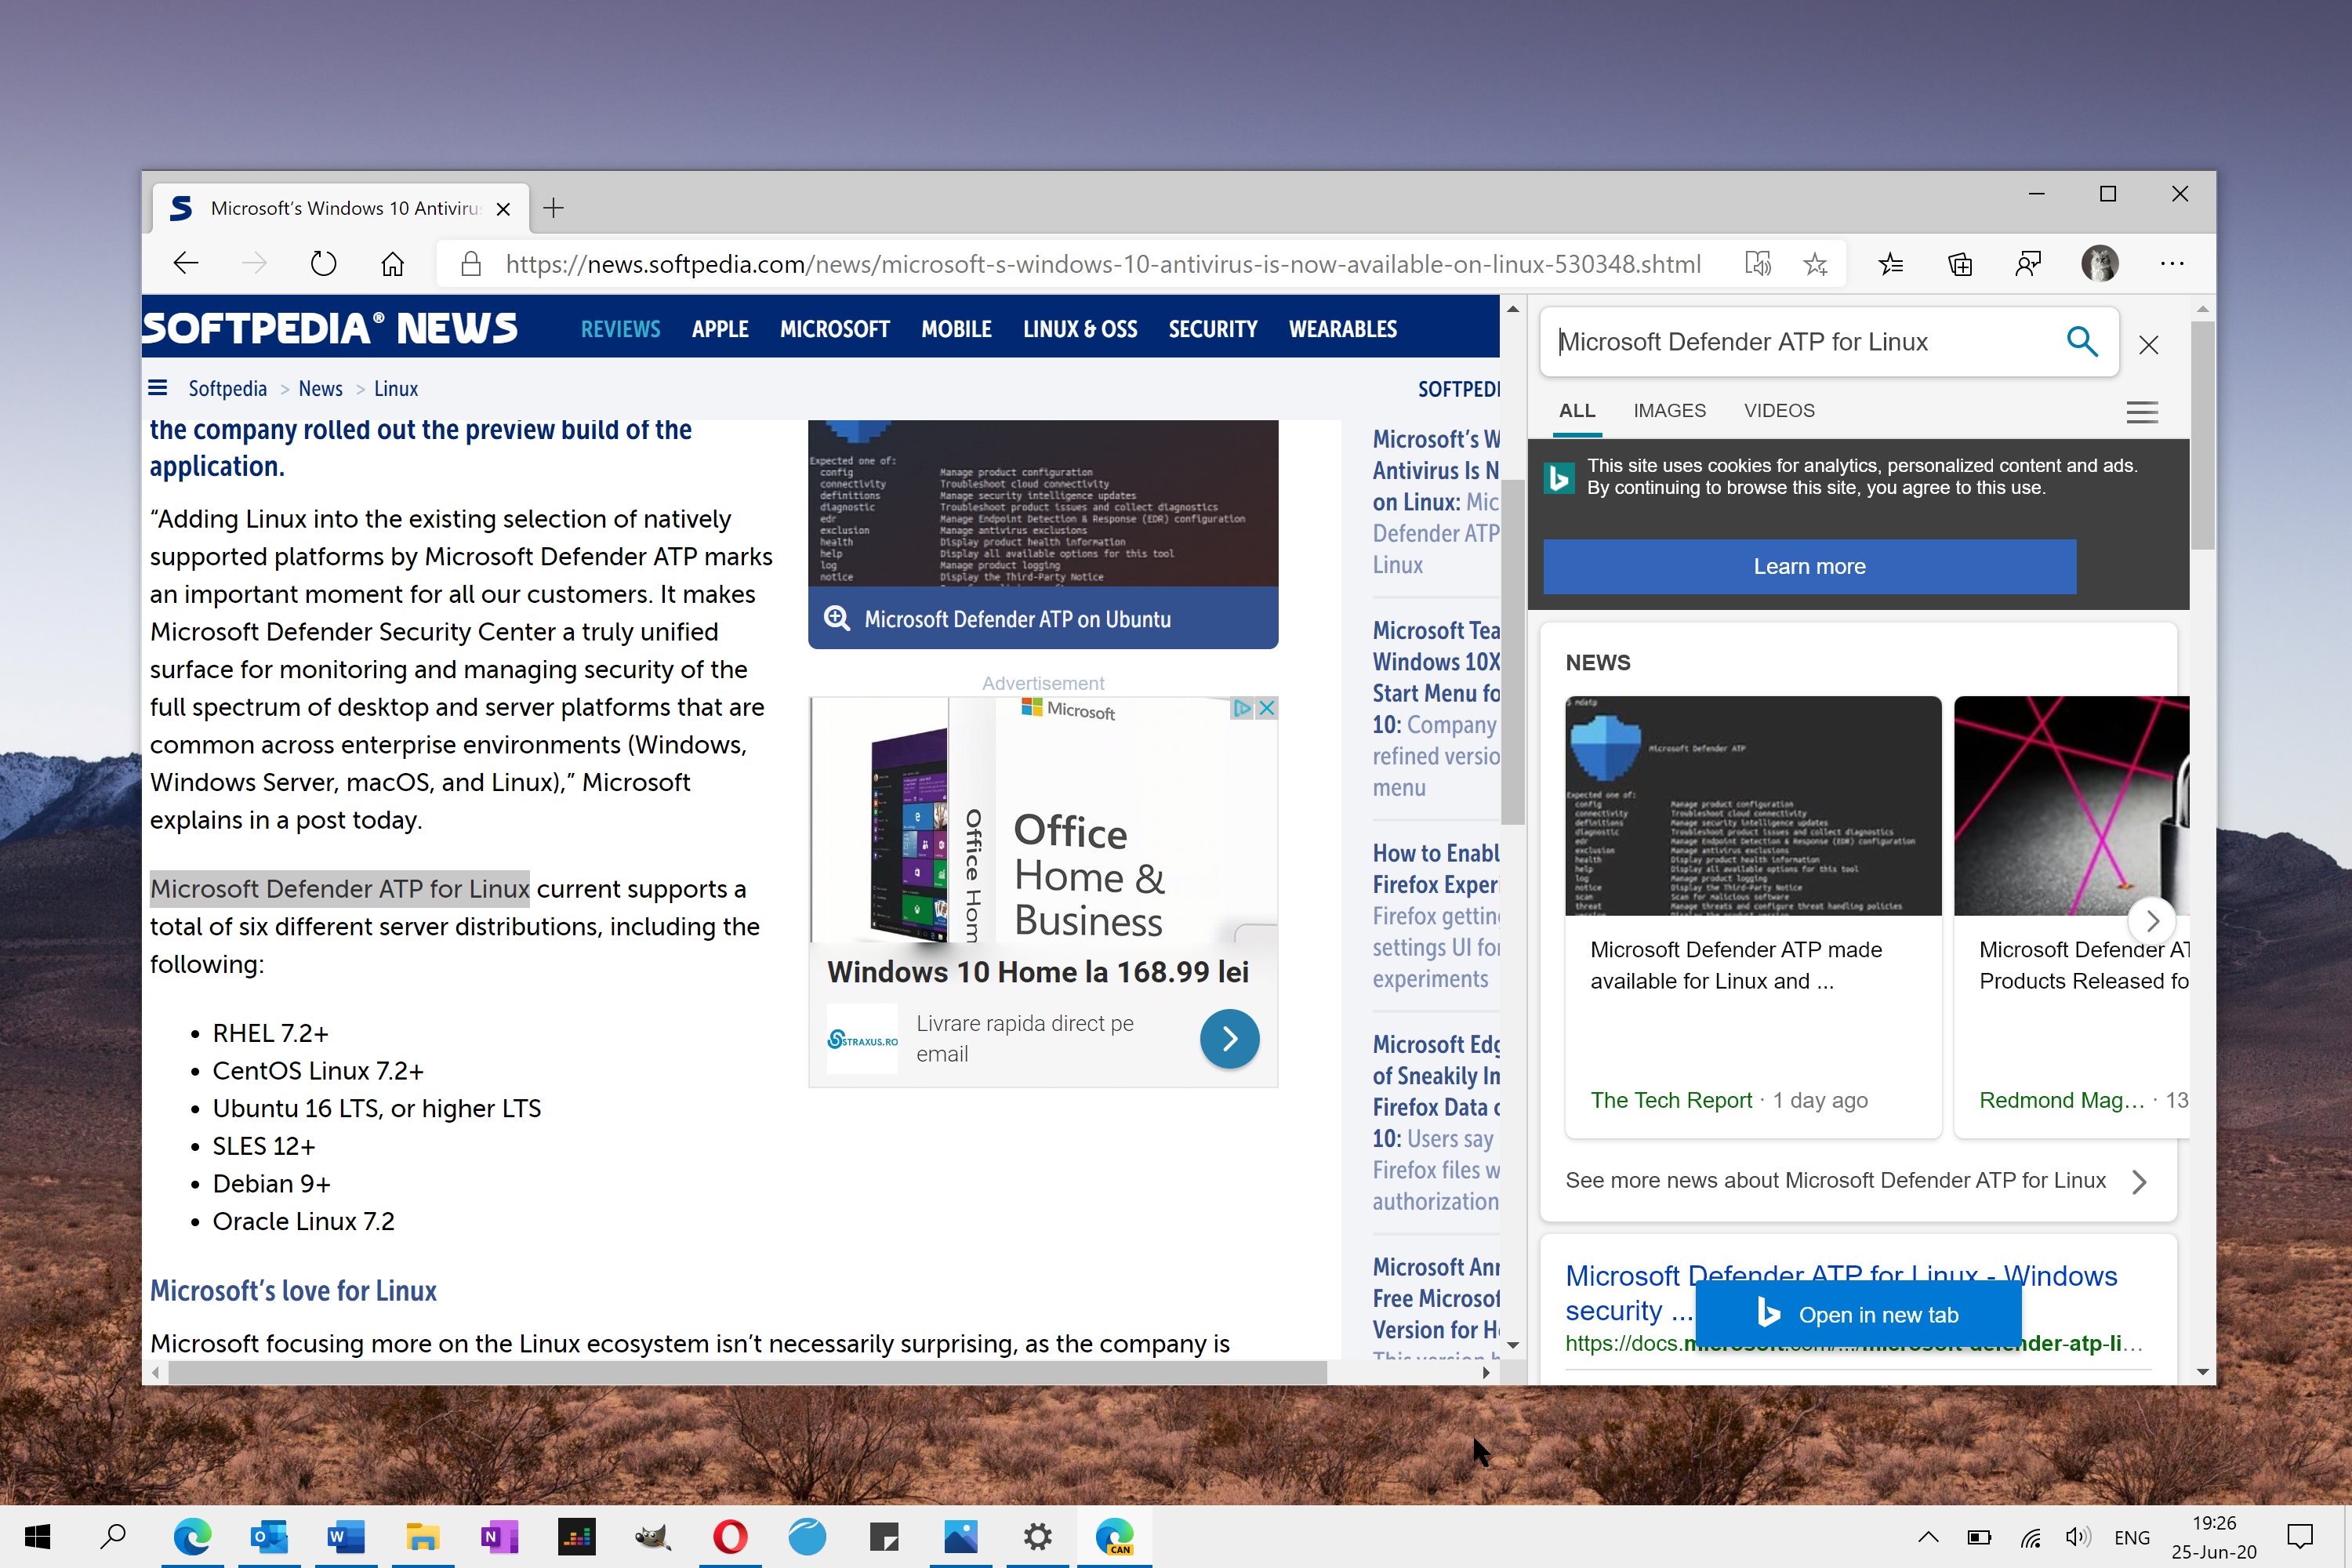 microsoft-to-add-a-sidebar-in-the-edge-browser-a-leaked-image-reveals